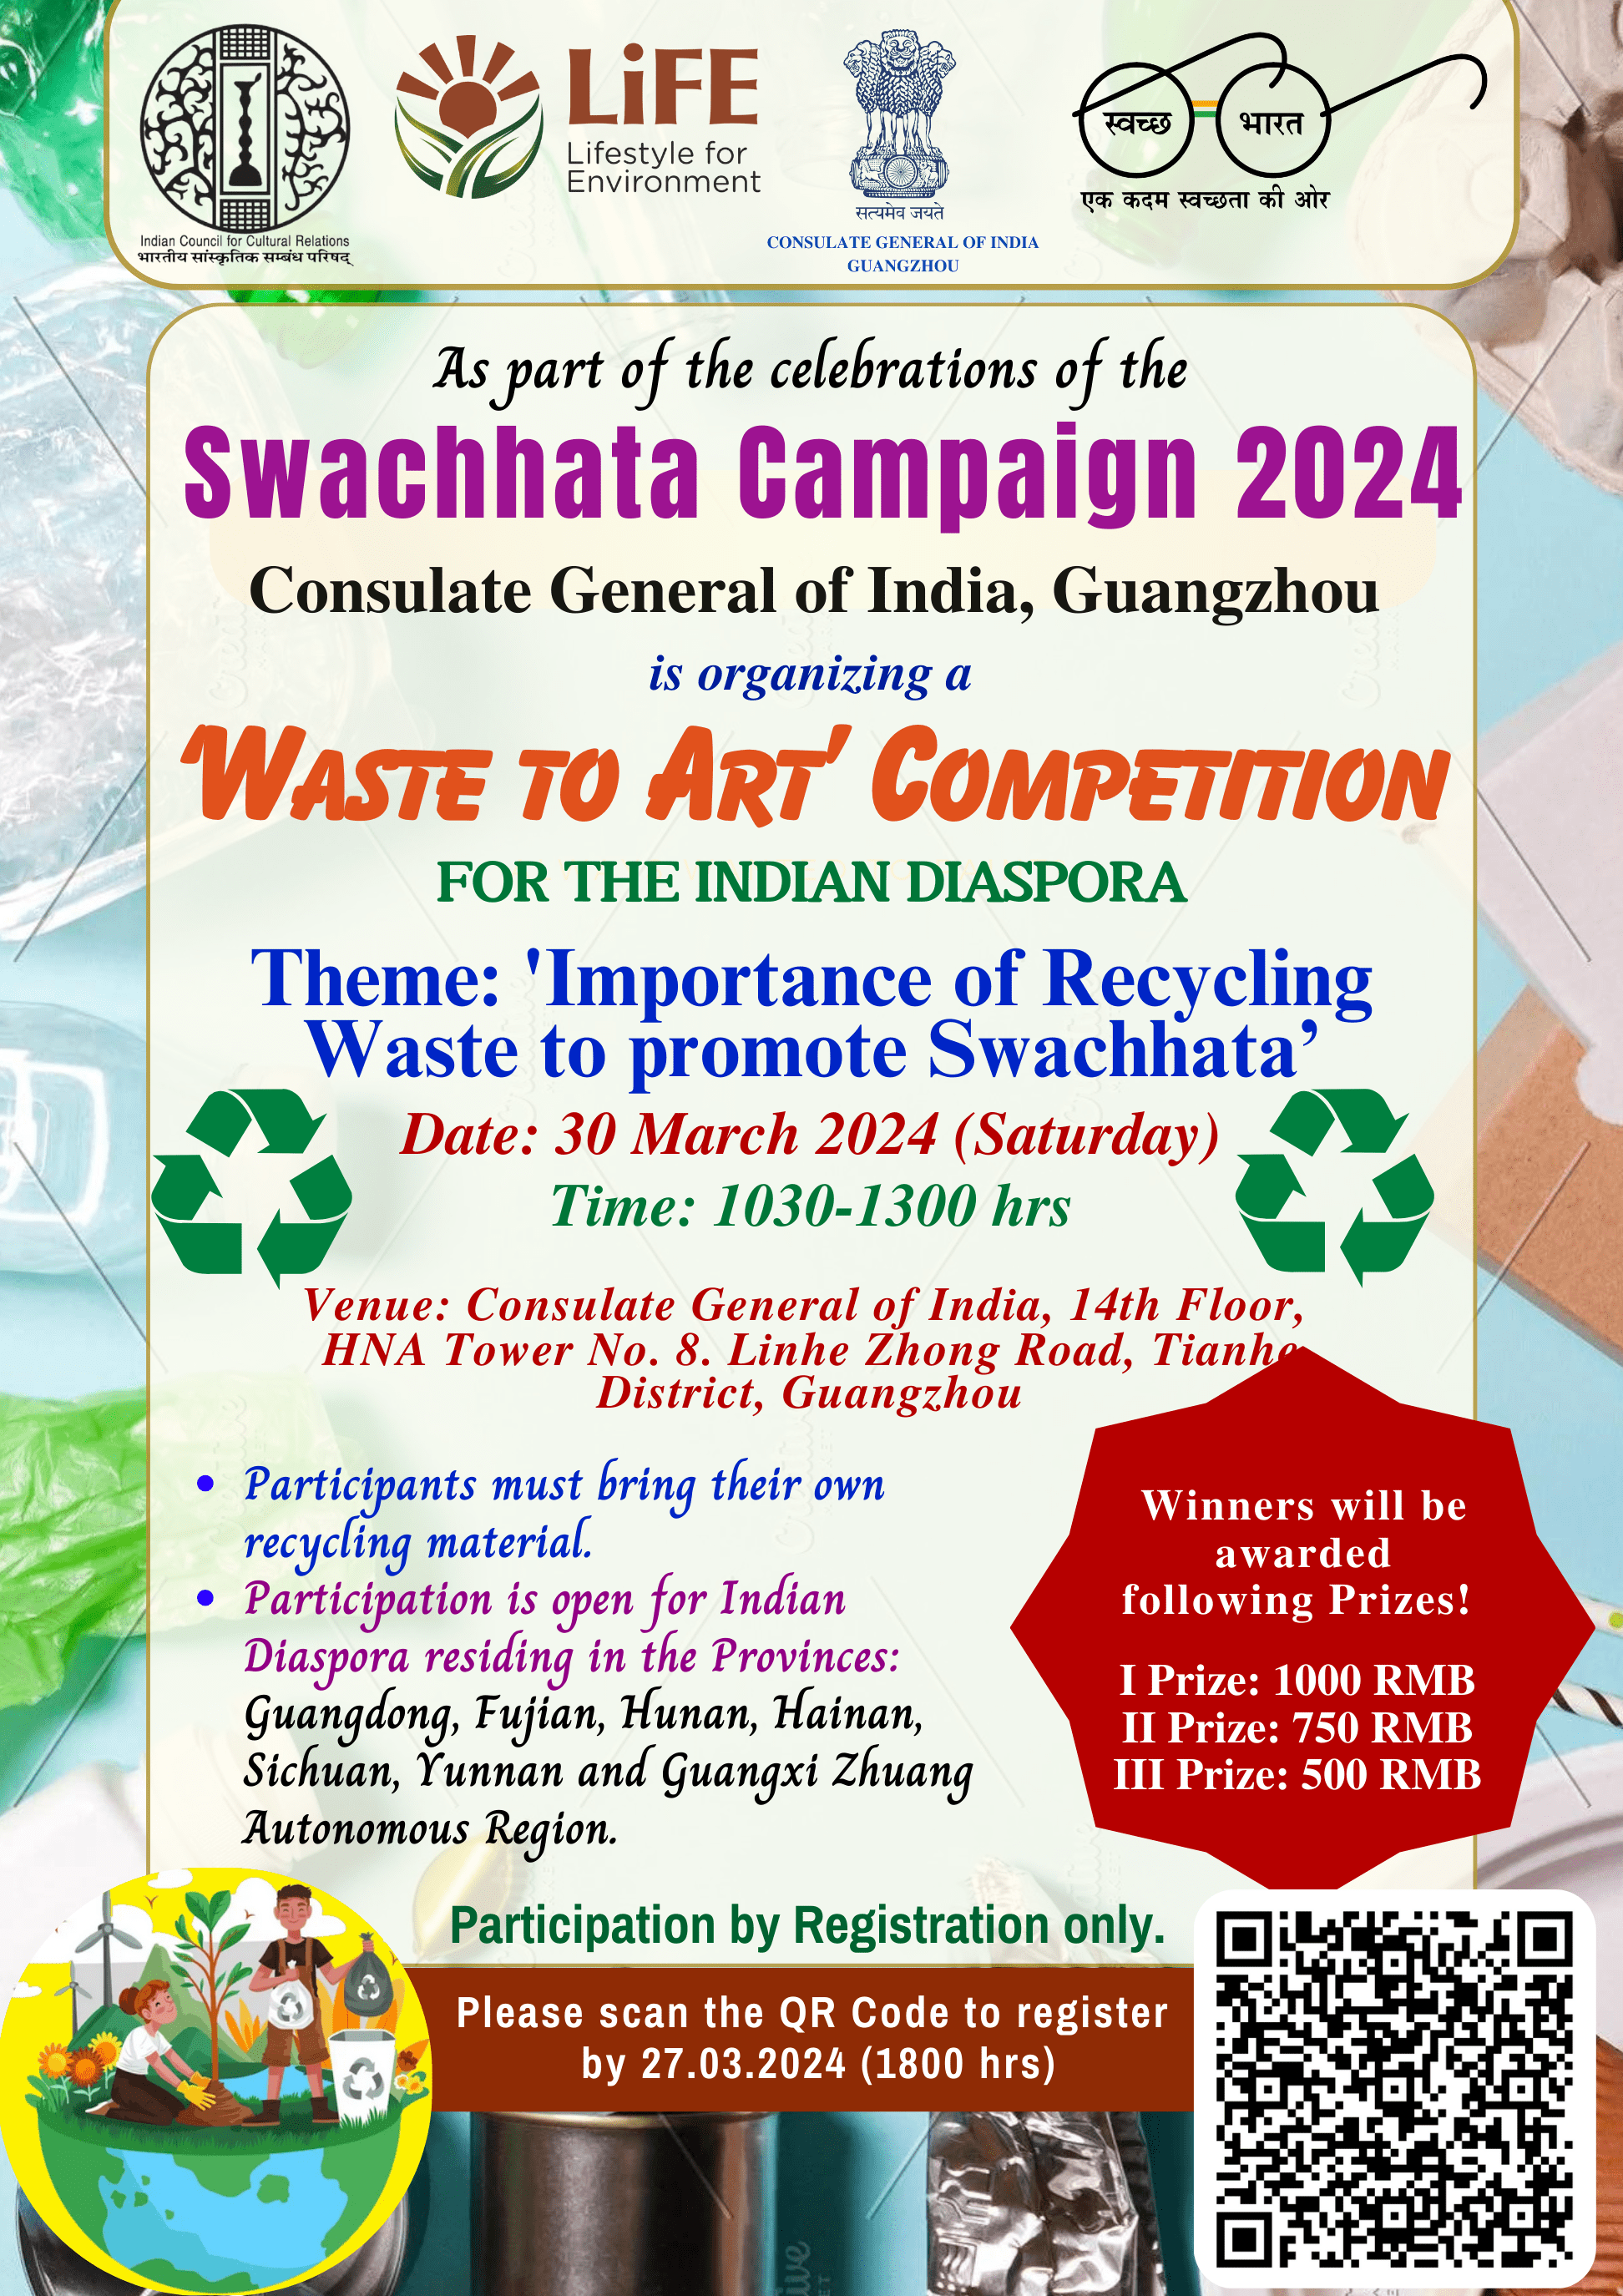 ‘Waste to Art’ Competition for the Indian Diaspora as part of the Swachhata Campaign 2024